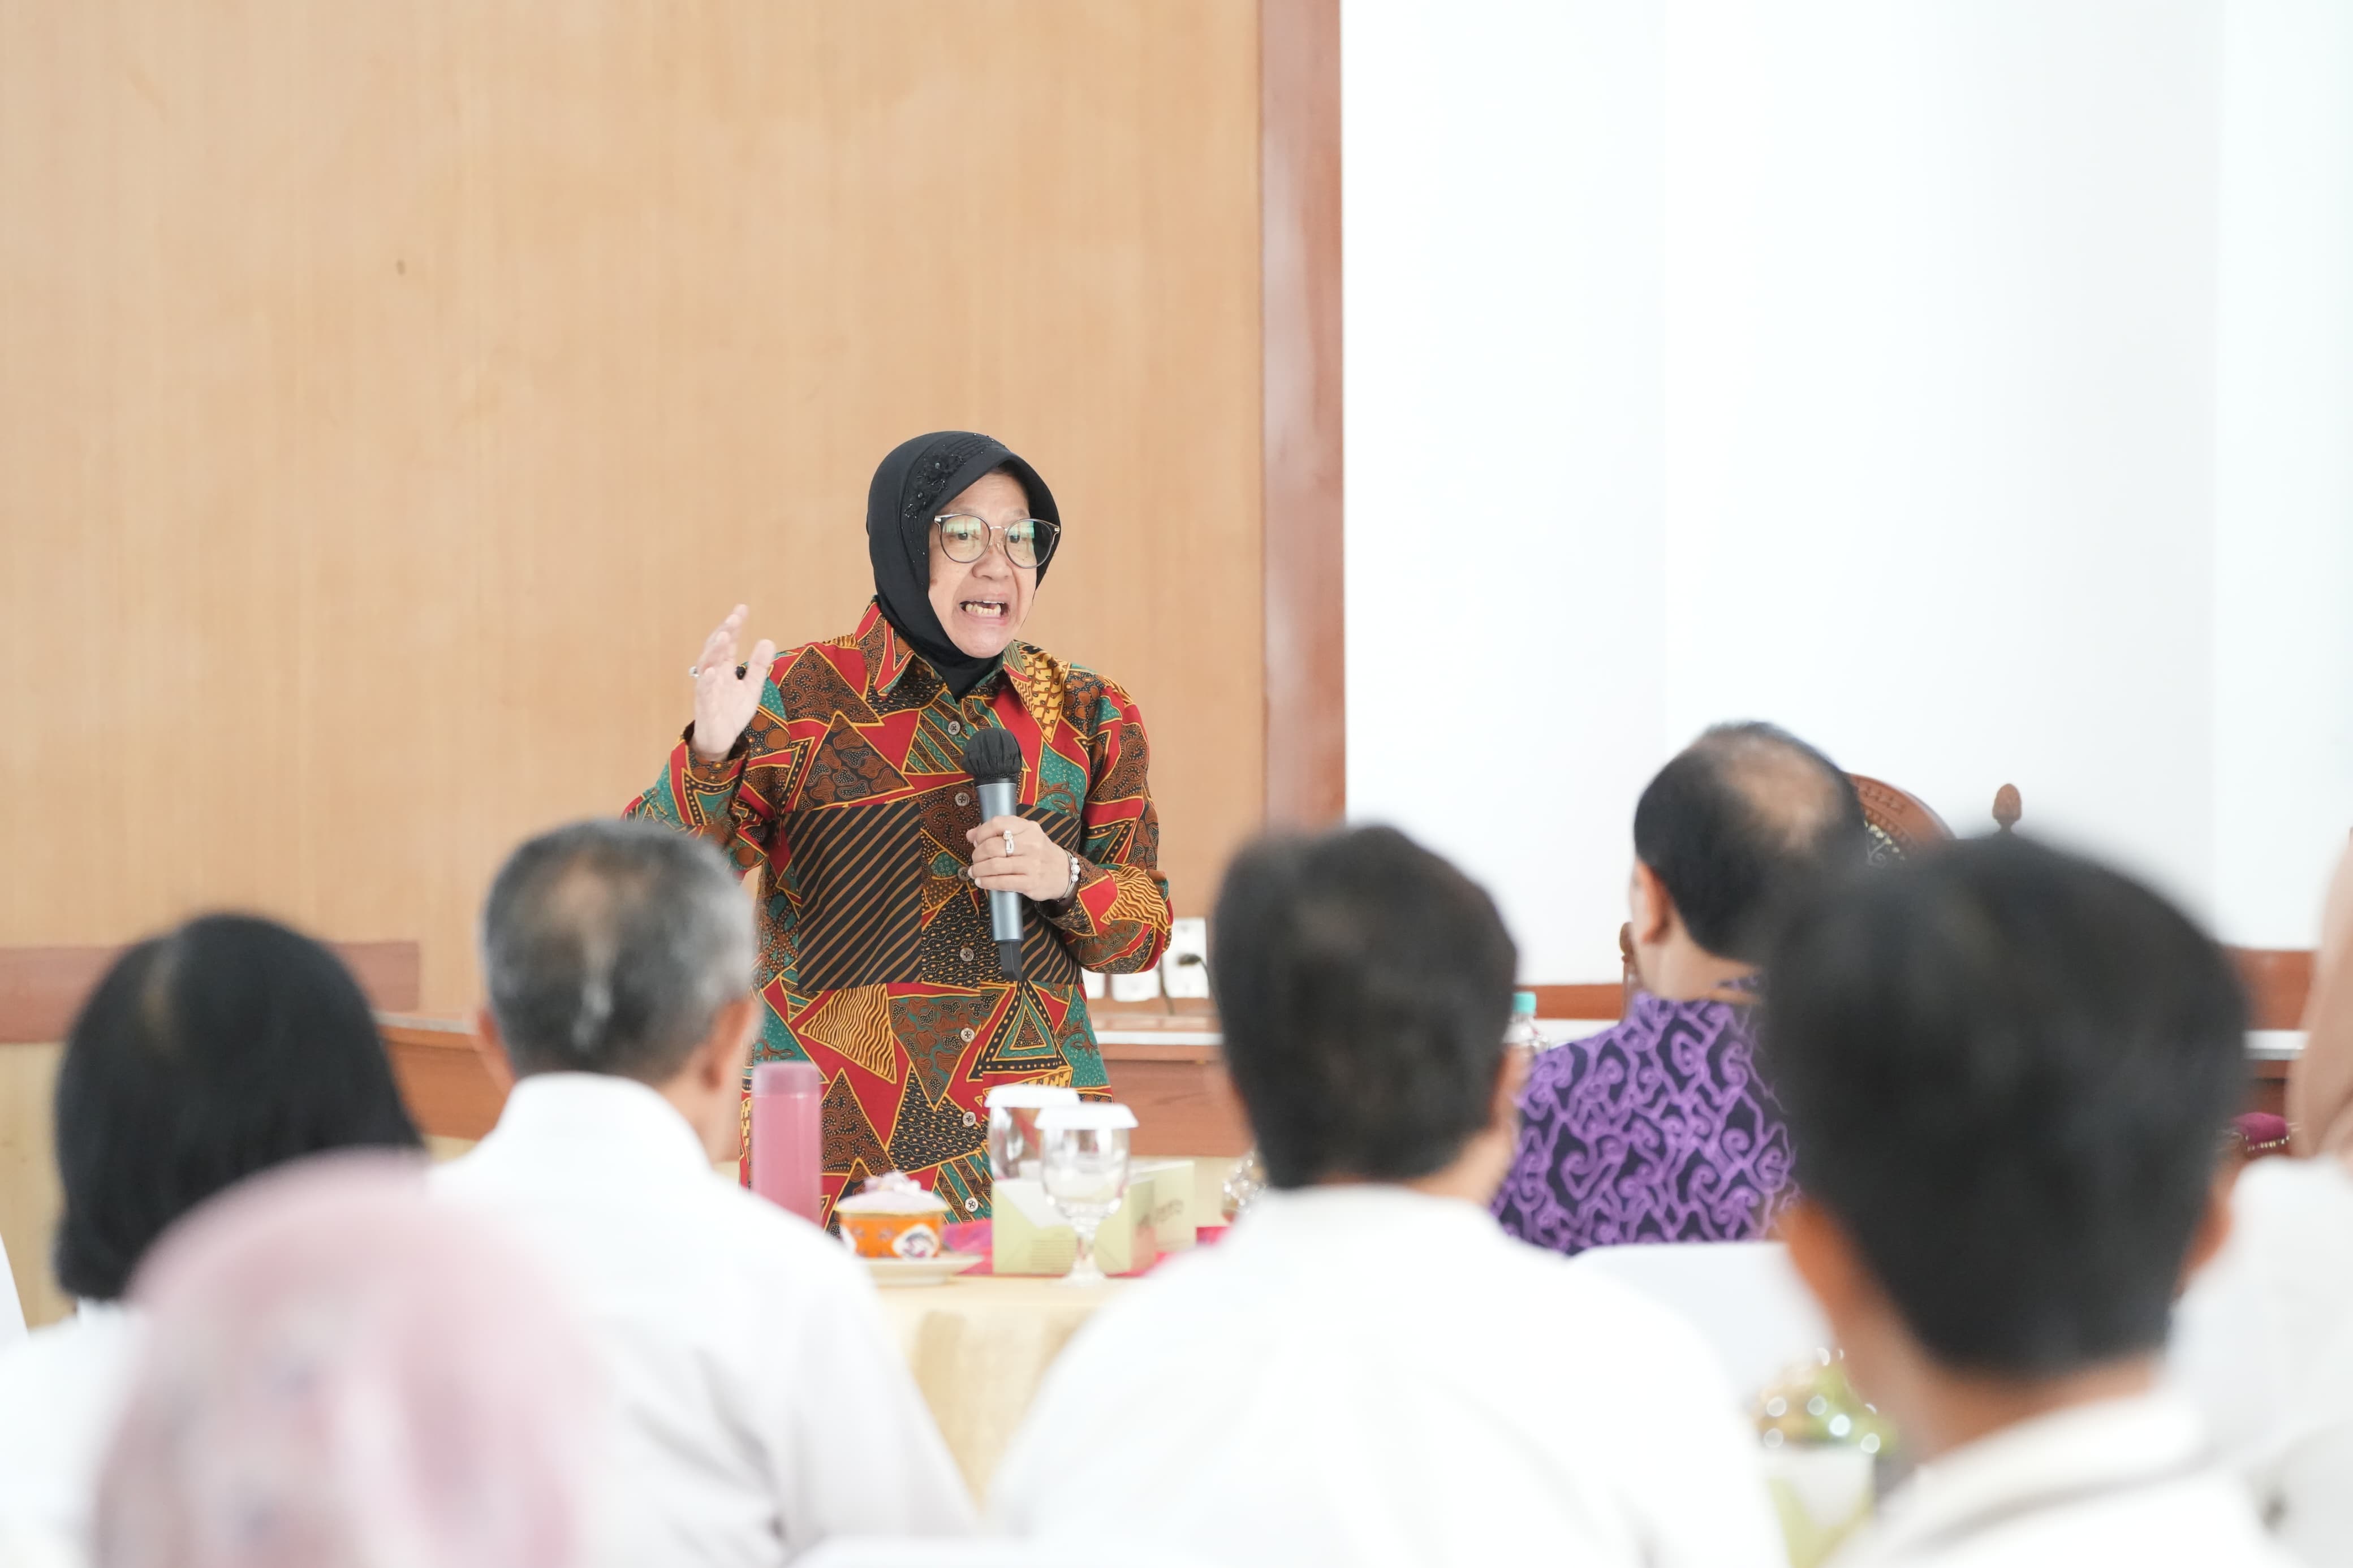 Minister of Social Affairs Risma in Discussion of Employee Backgrounds in Anthropology and Psychology